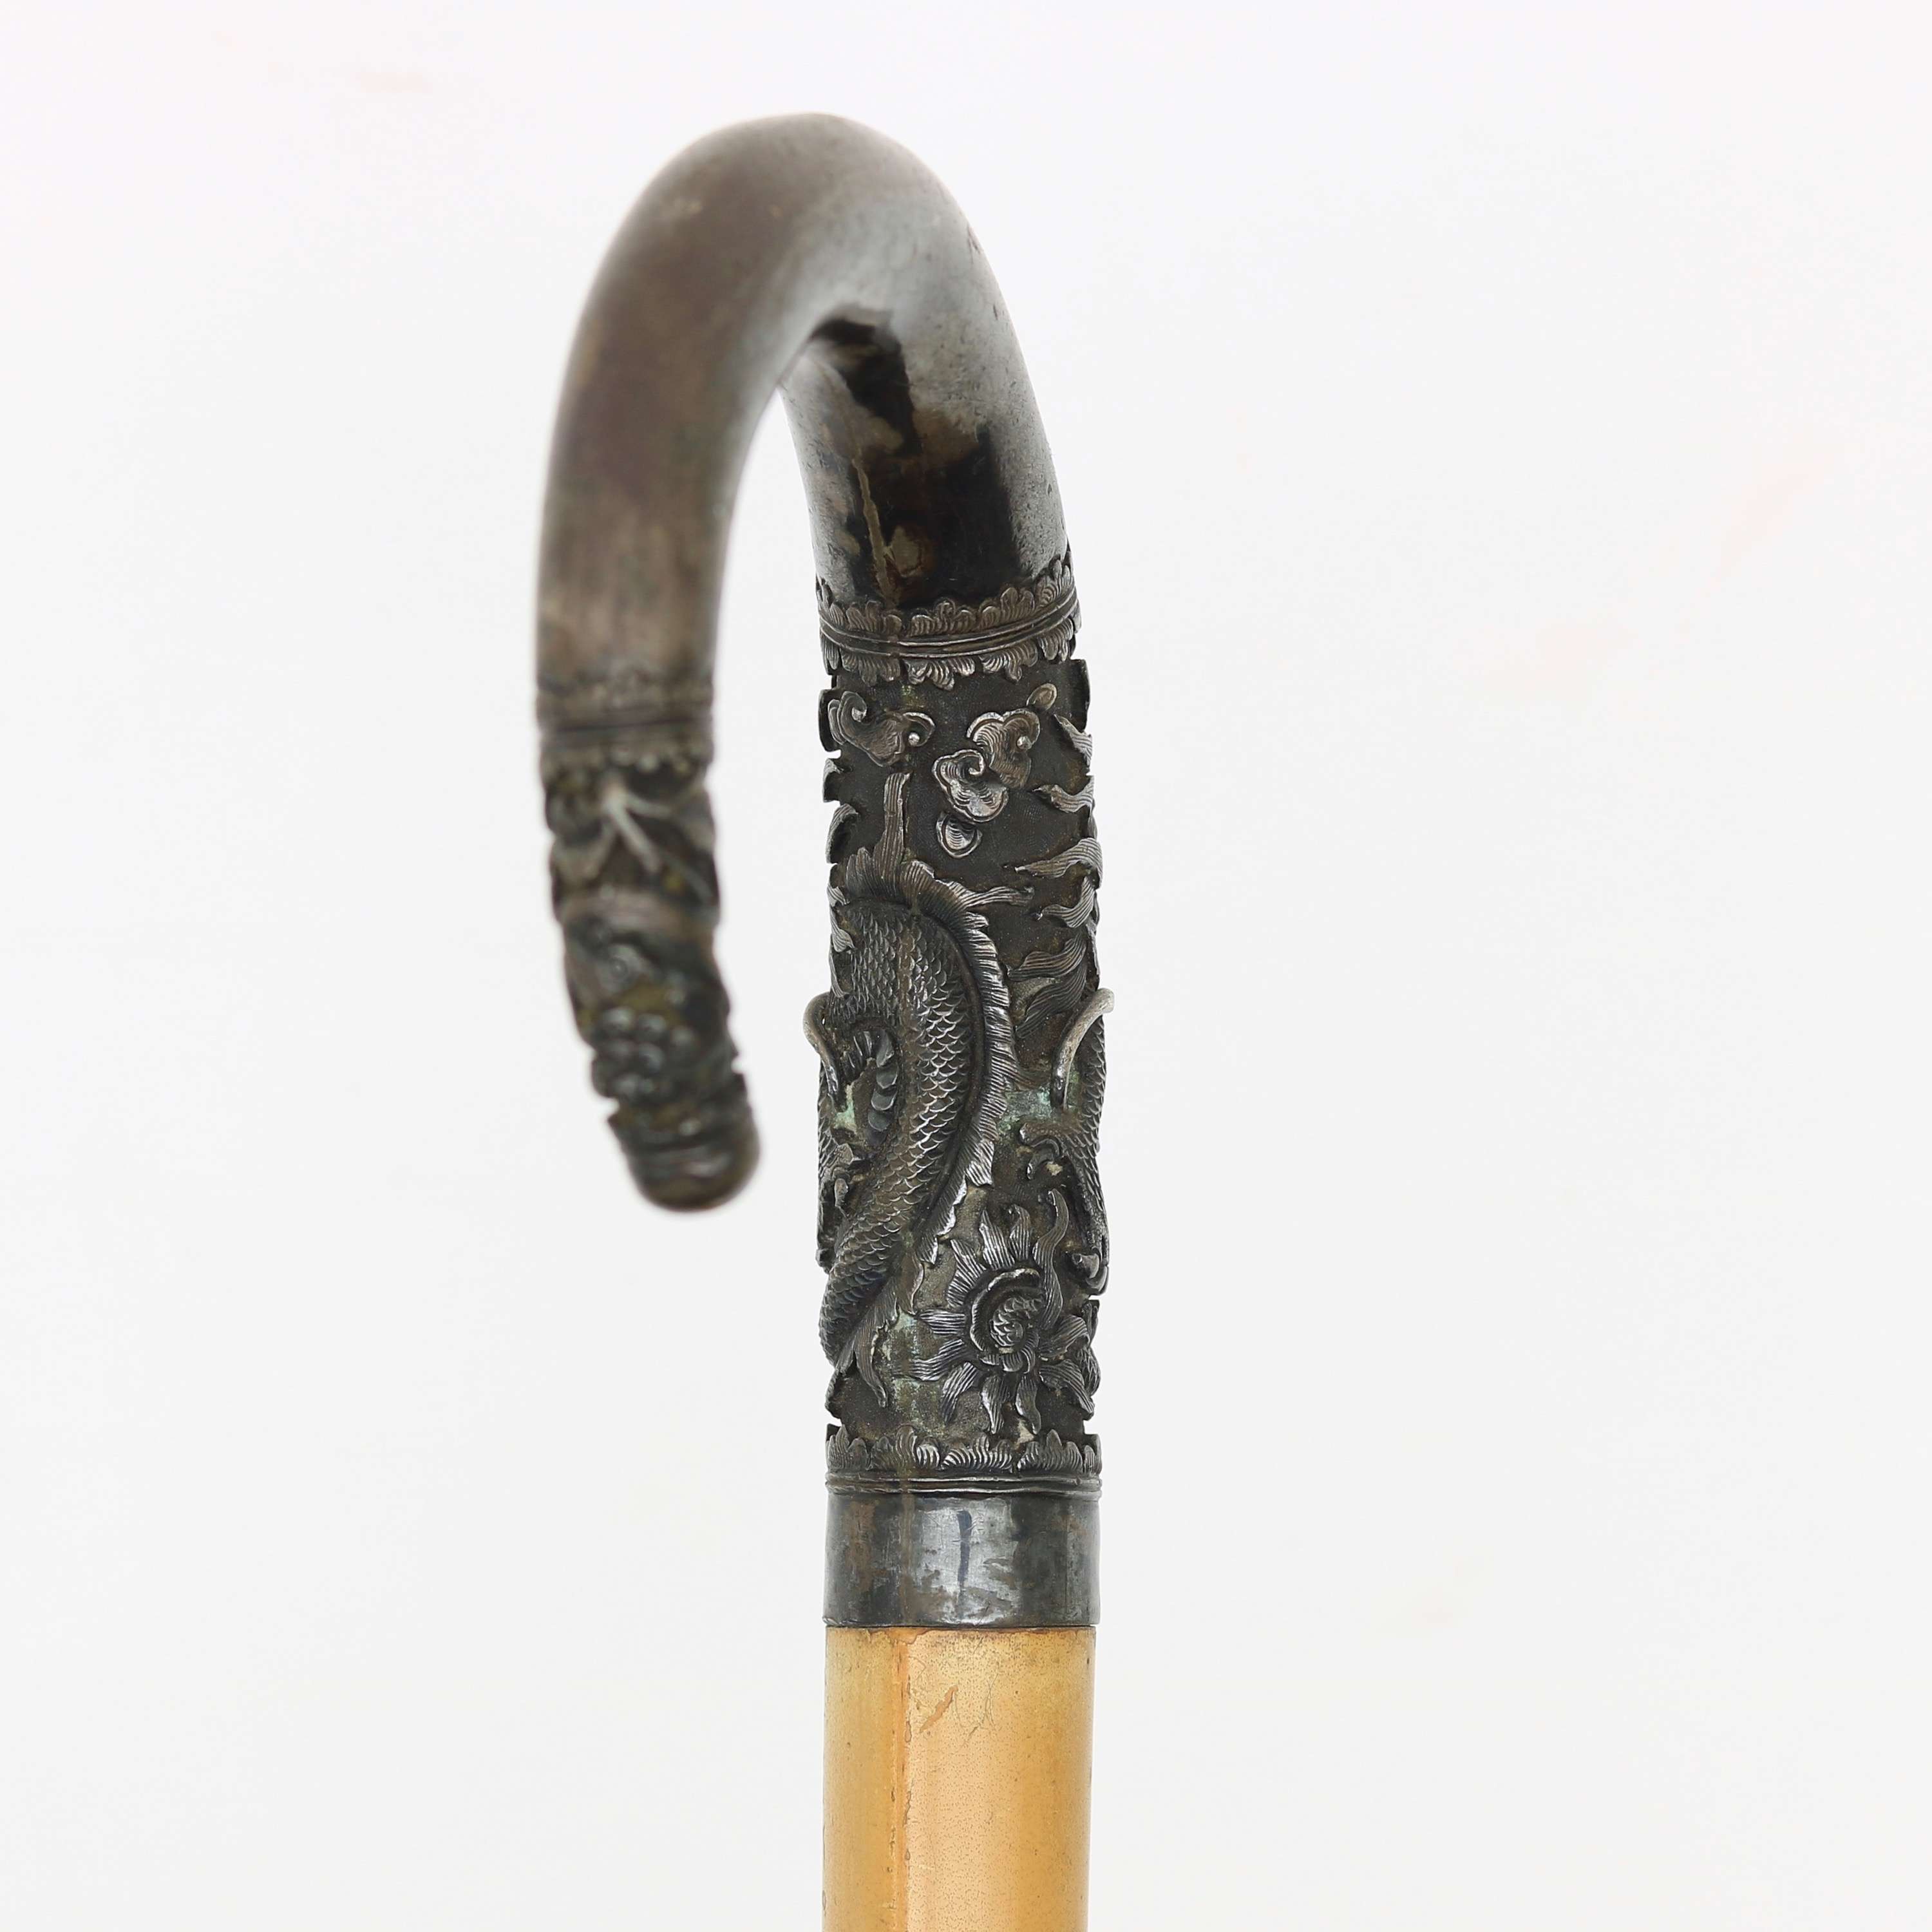 Vietnamese crook handle cane with silver handle